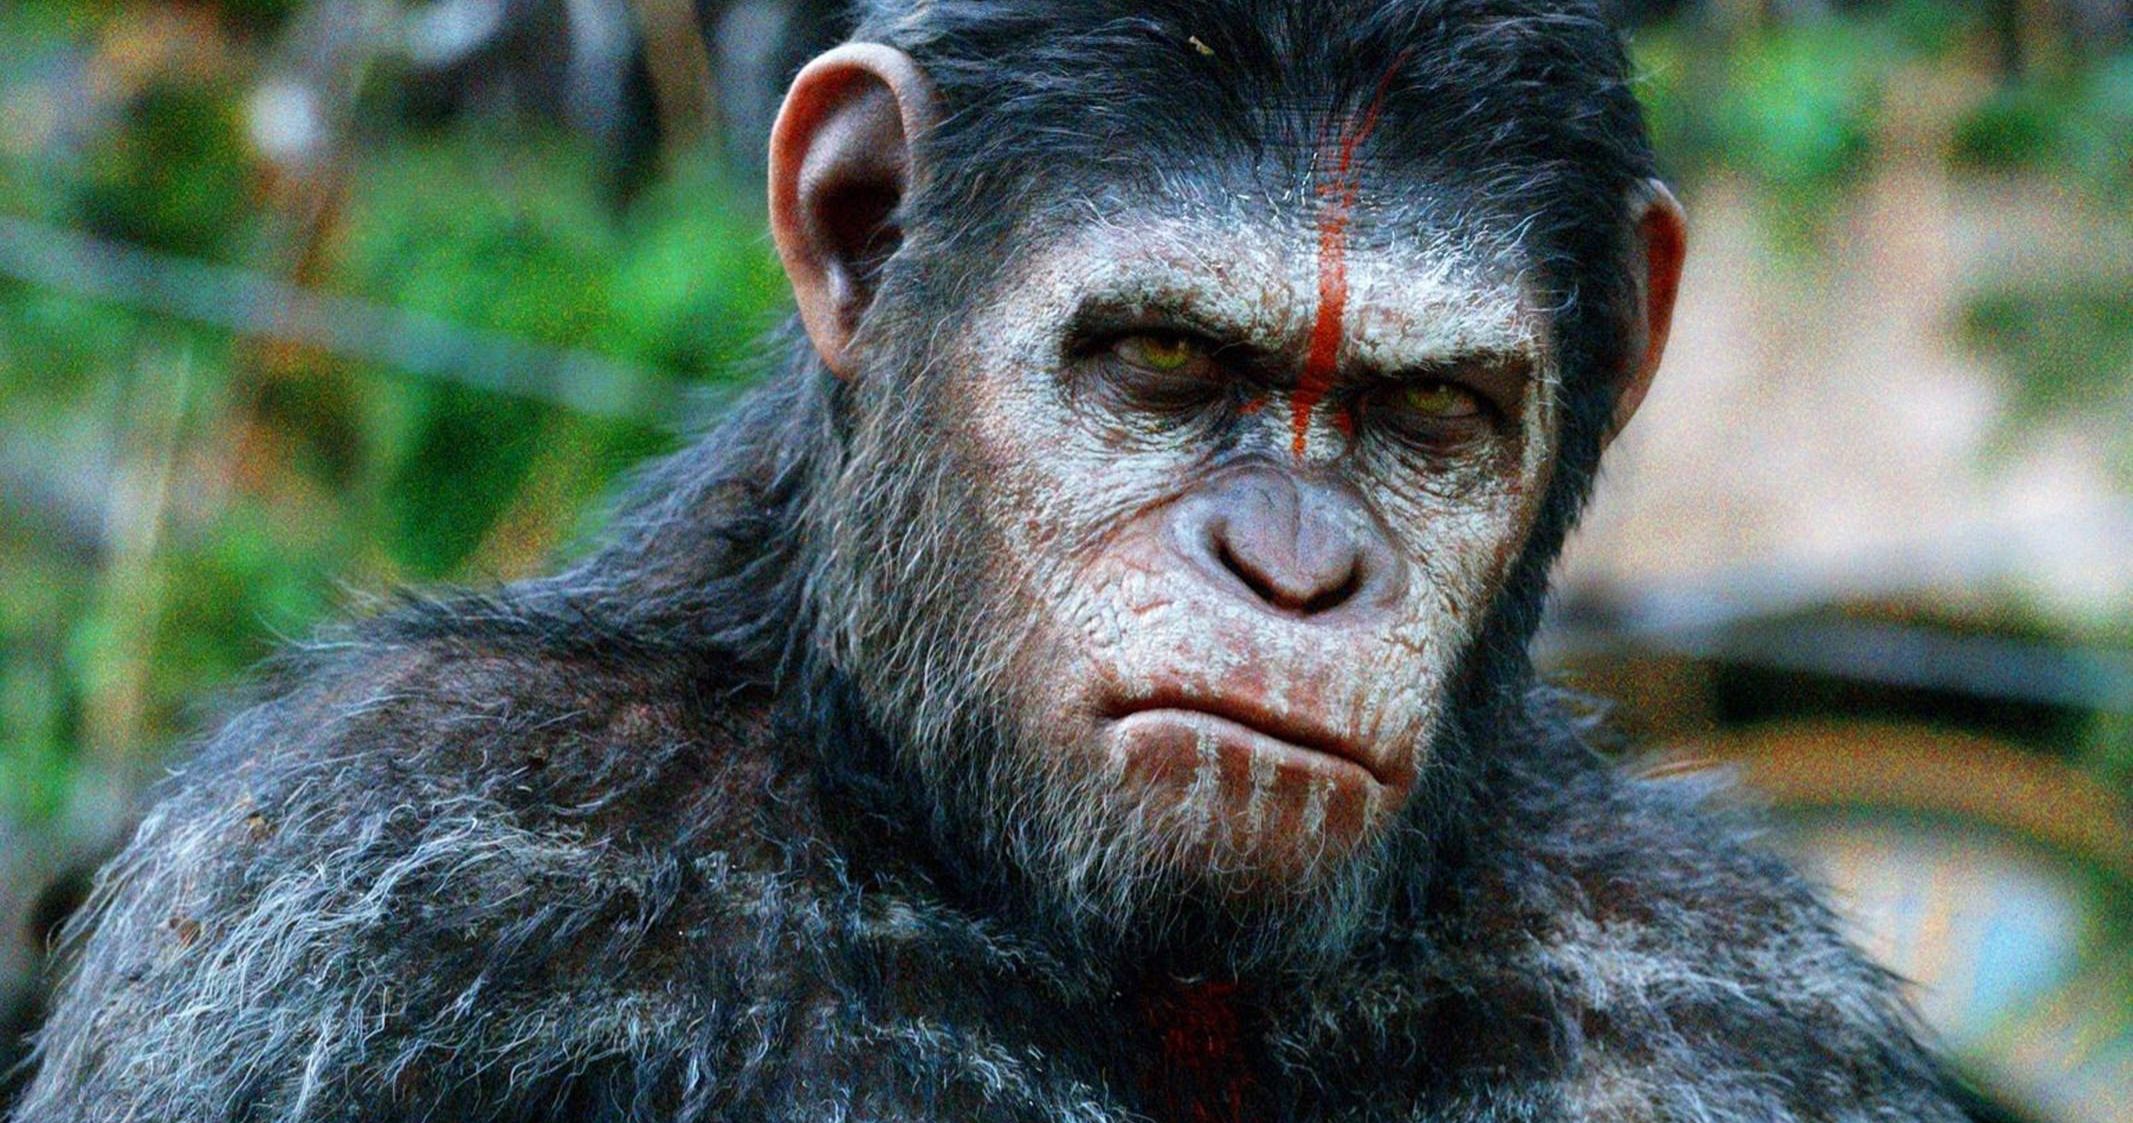 Disney's Planet of the Apes Movie Continues Caesar's Legacy, So It's Not a Reboot?